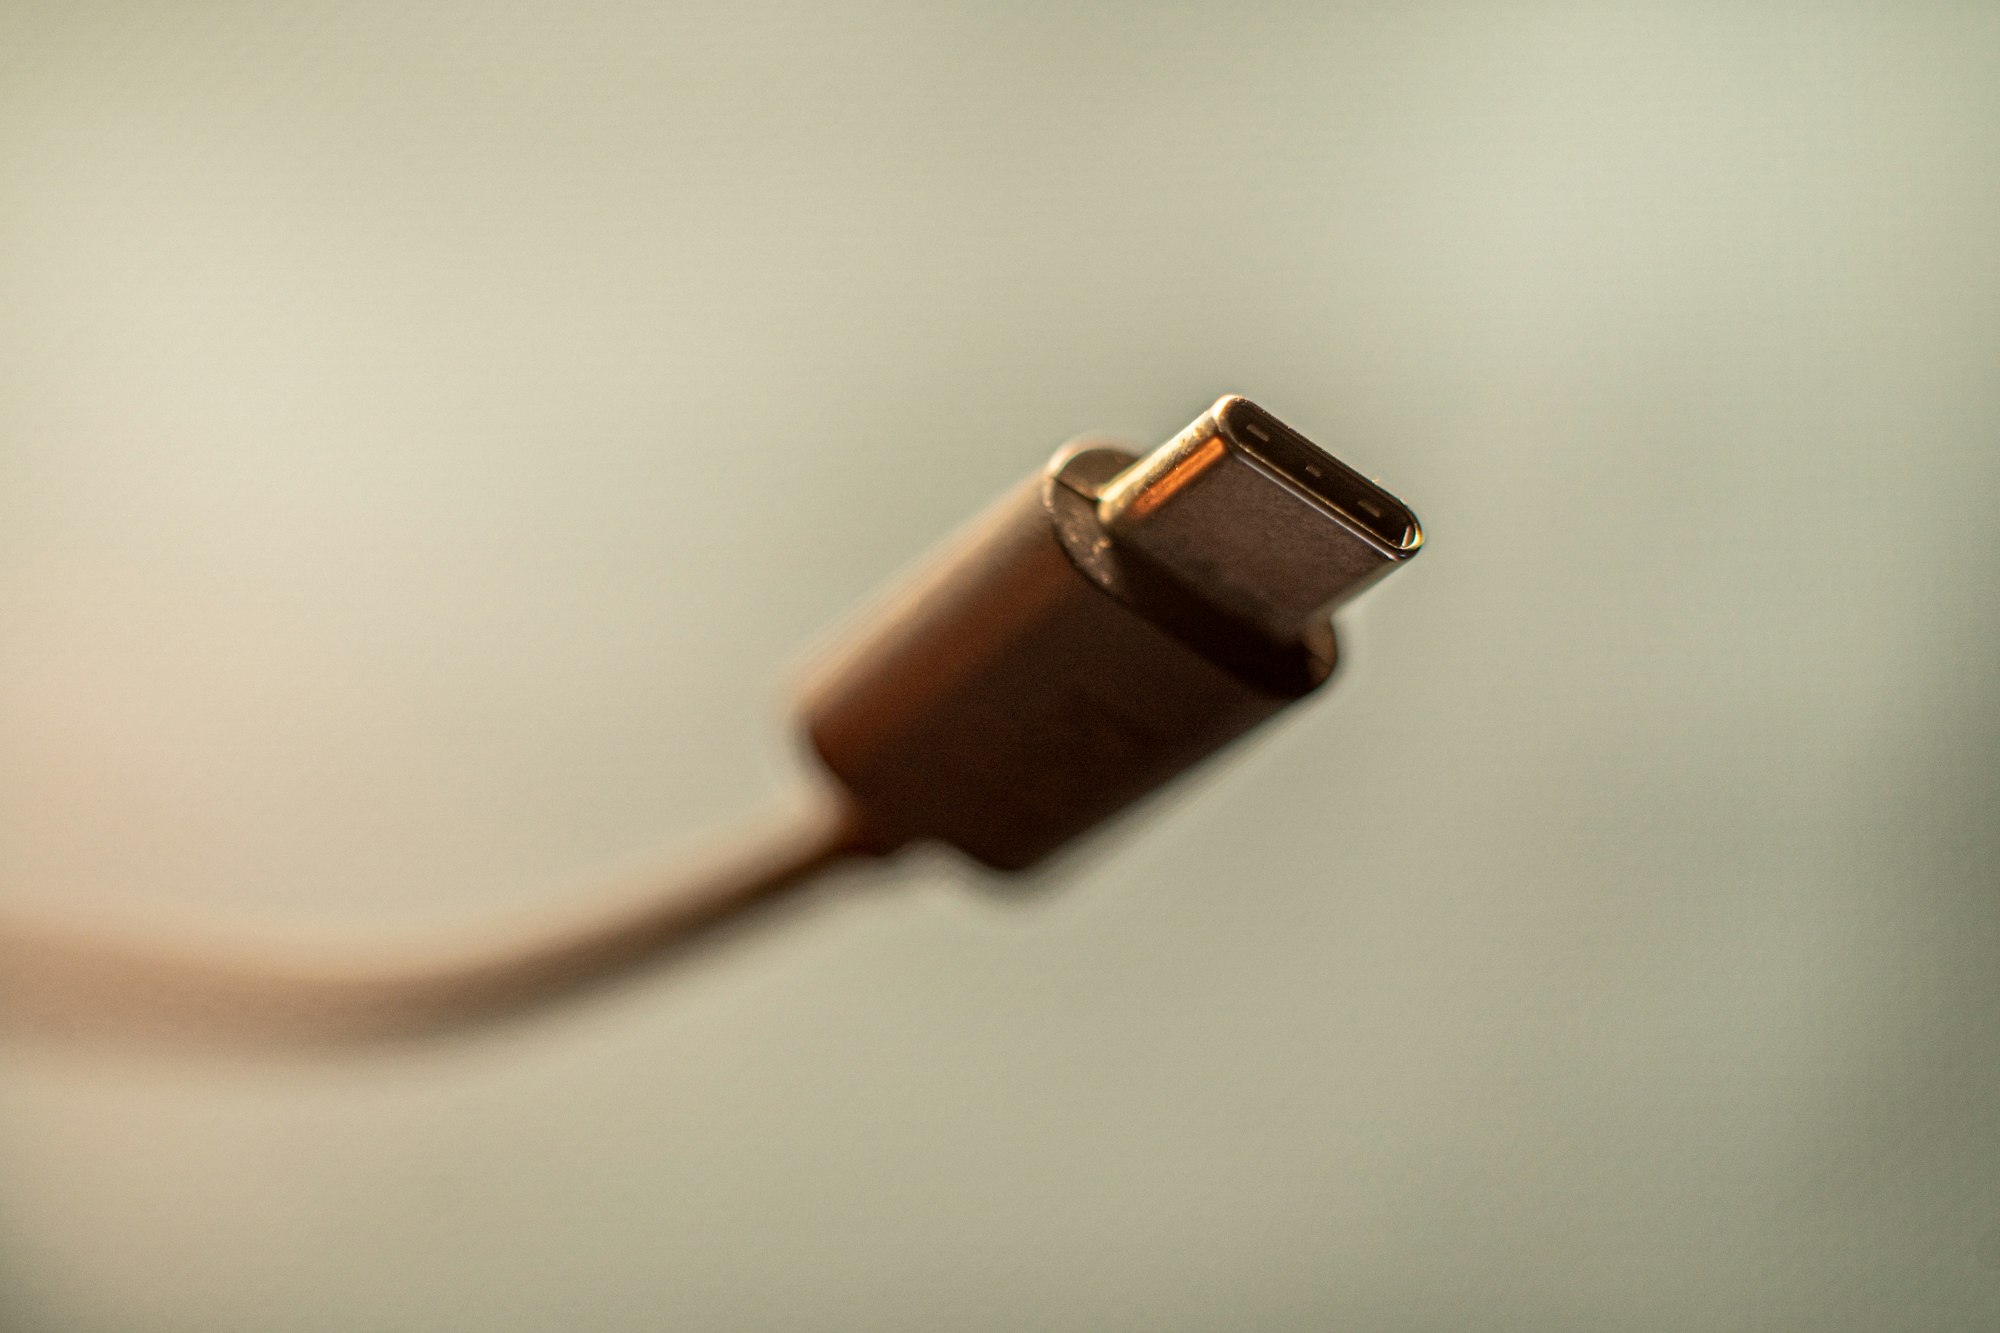 Apple confirms iPhones will get USB-C charging to comply with EU law